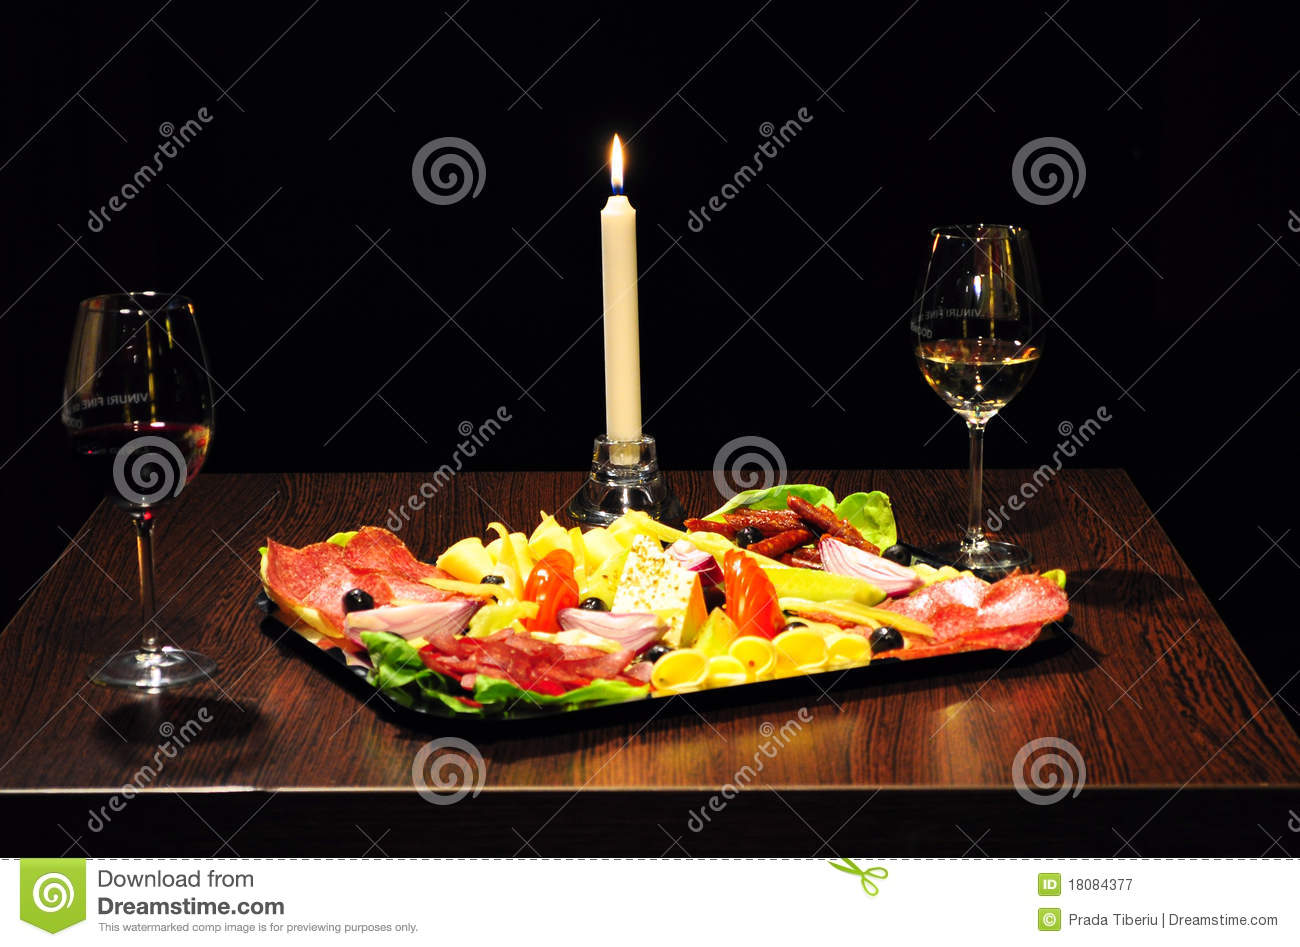 Candlelit Dinner Royalty Free Stock Photography   Image  18084377